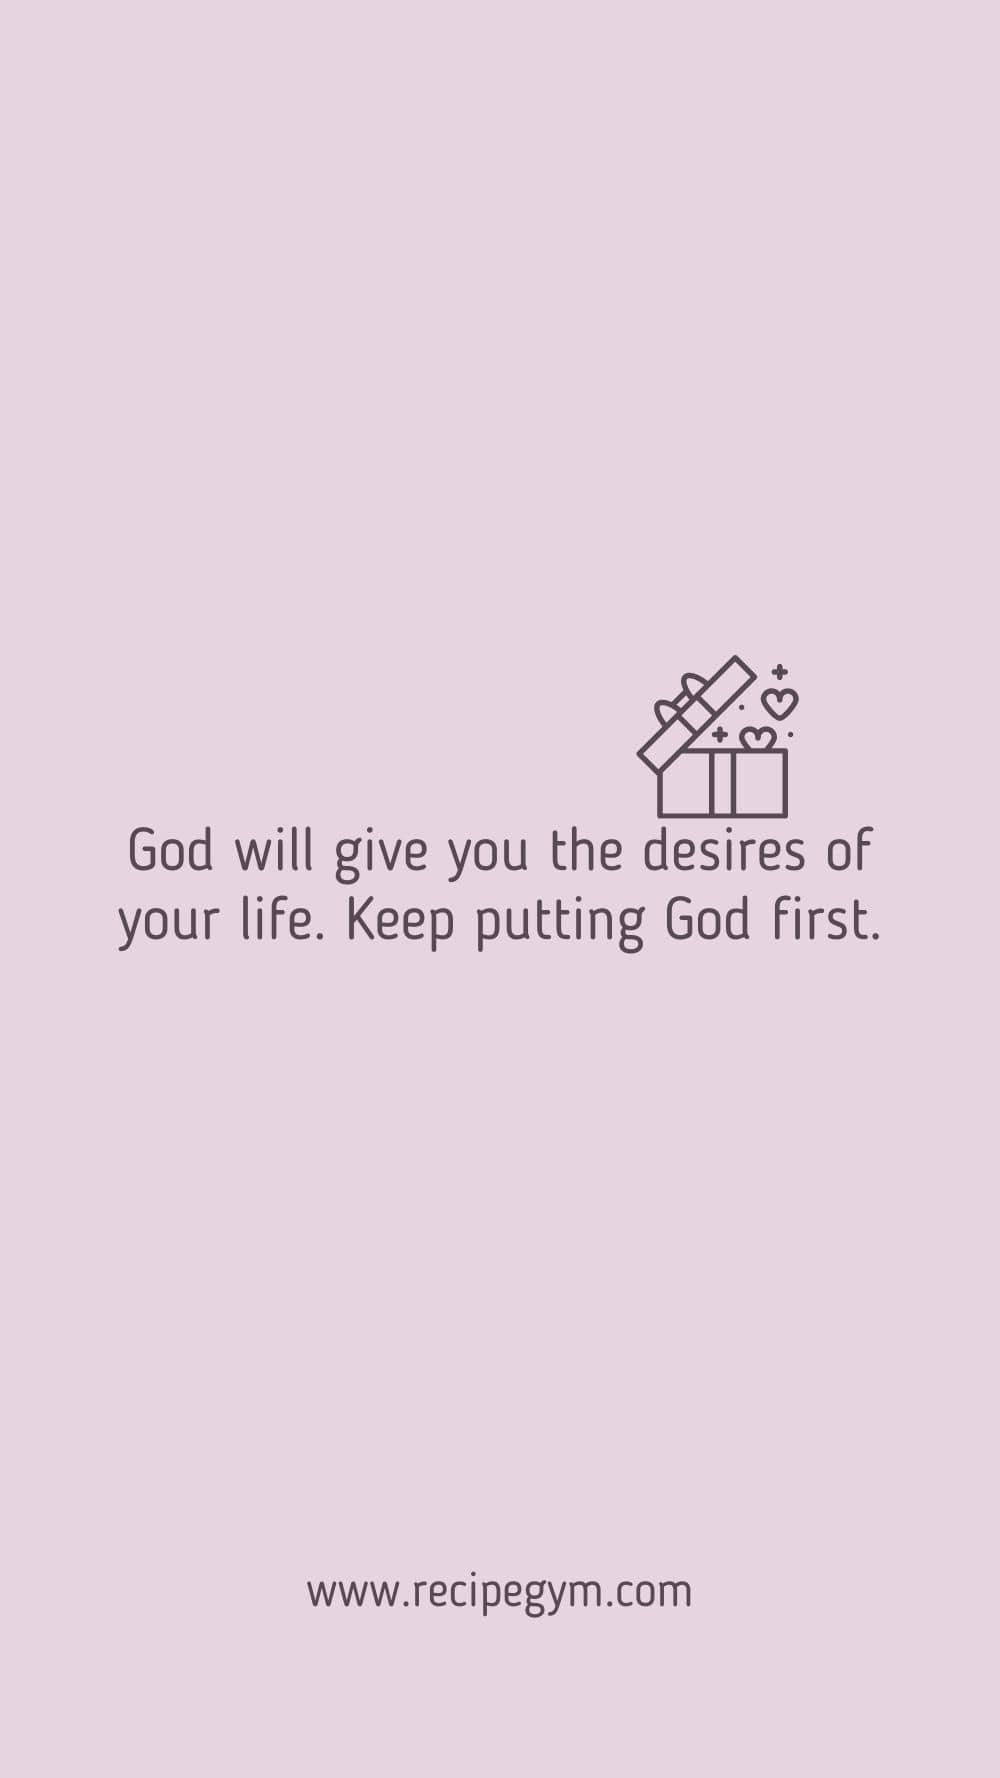 God will give you the desires of your life. Keep putting God first